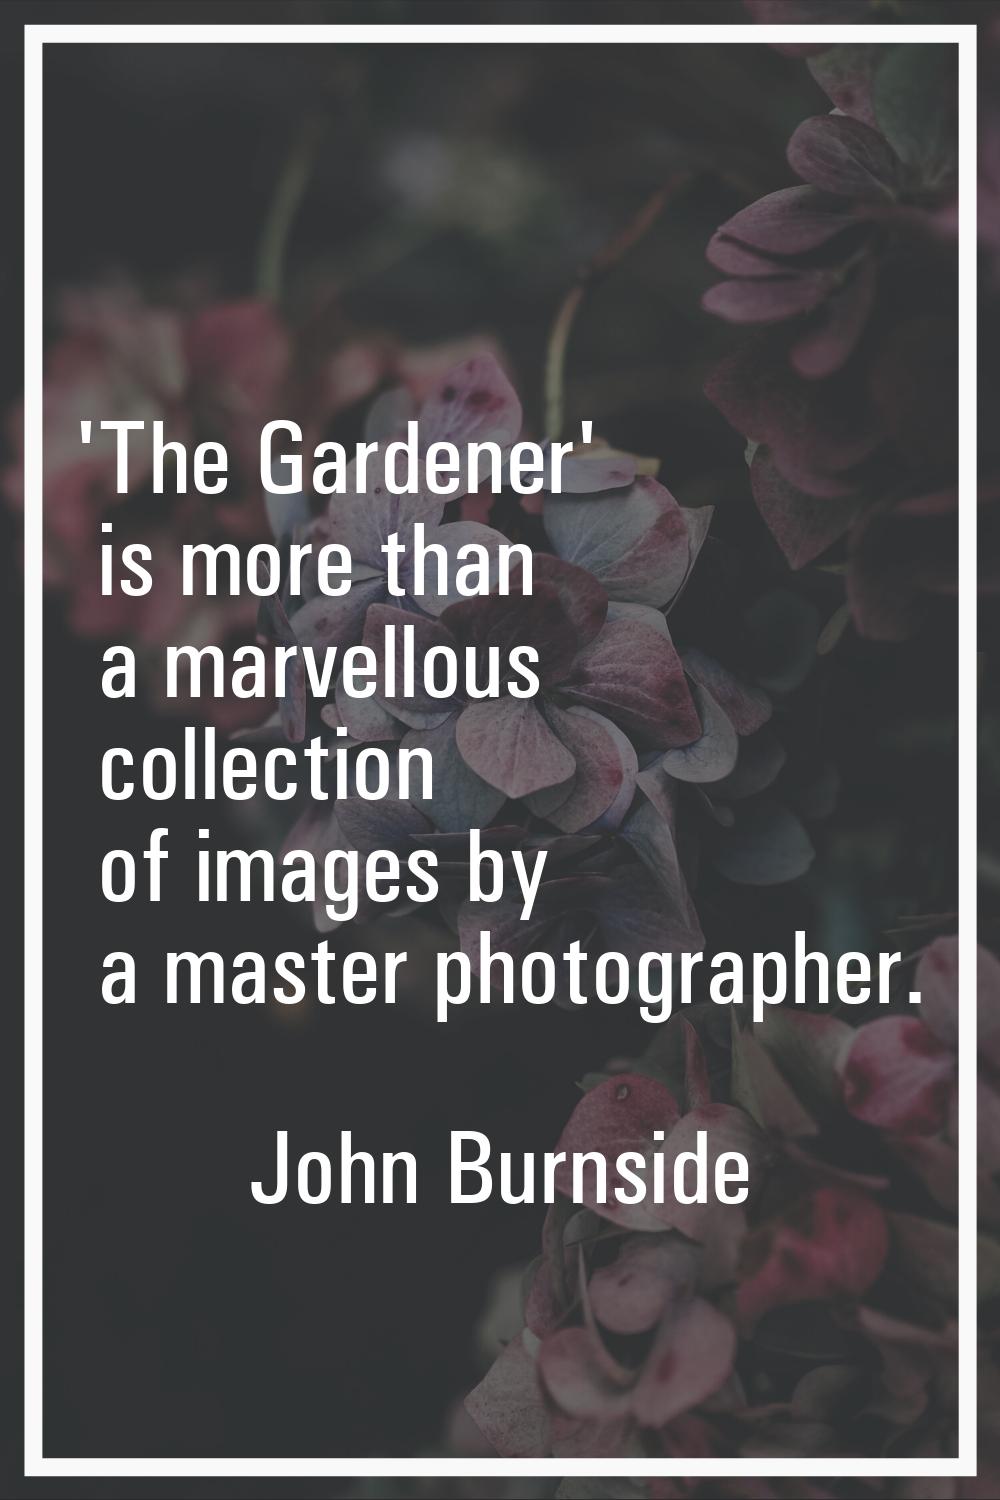 'The Gardener' is more than a marvellous collection of images by a master photographer.